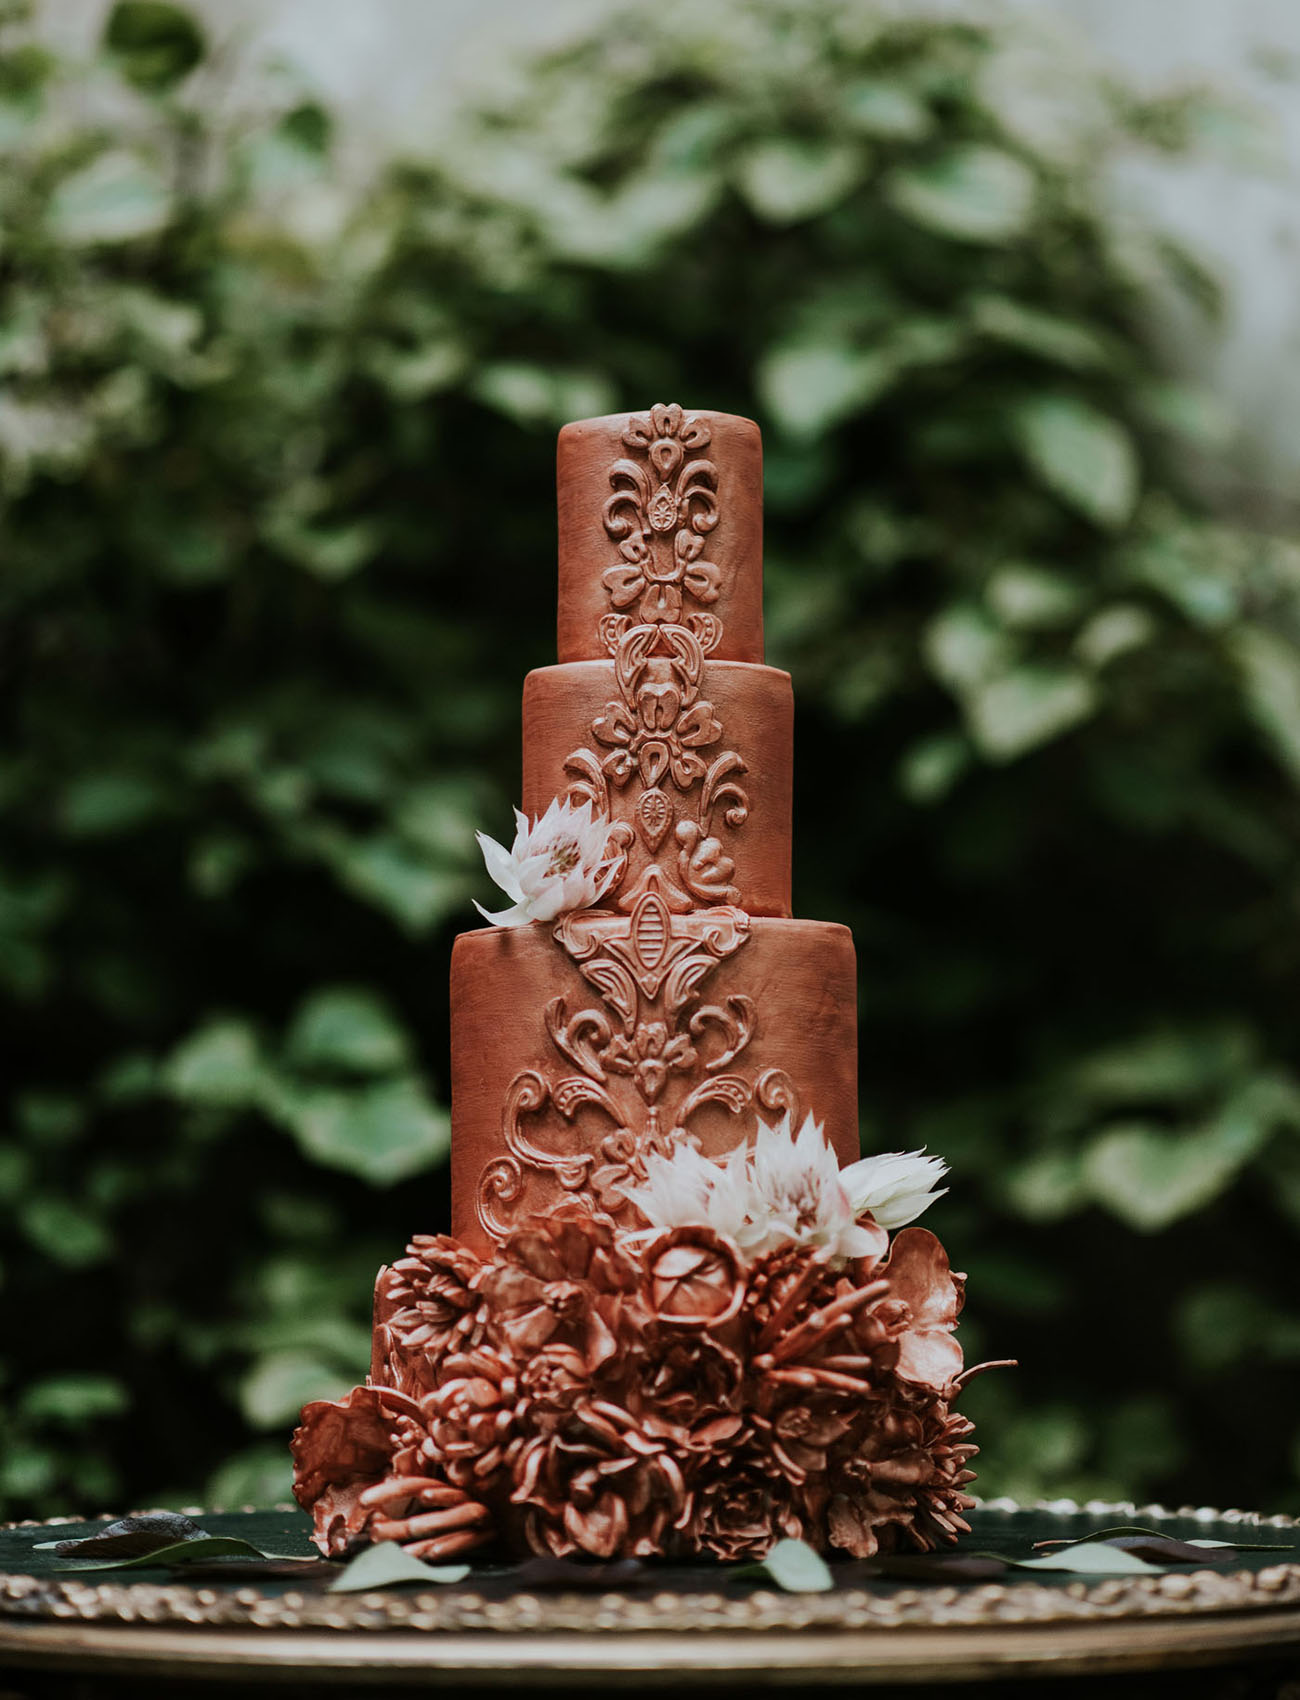 A copper wedidng cake with textural decor and edible flowers